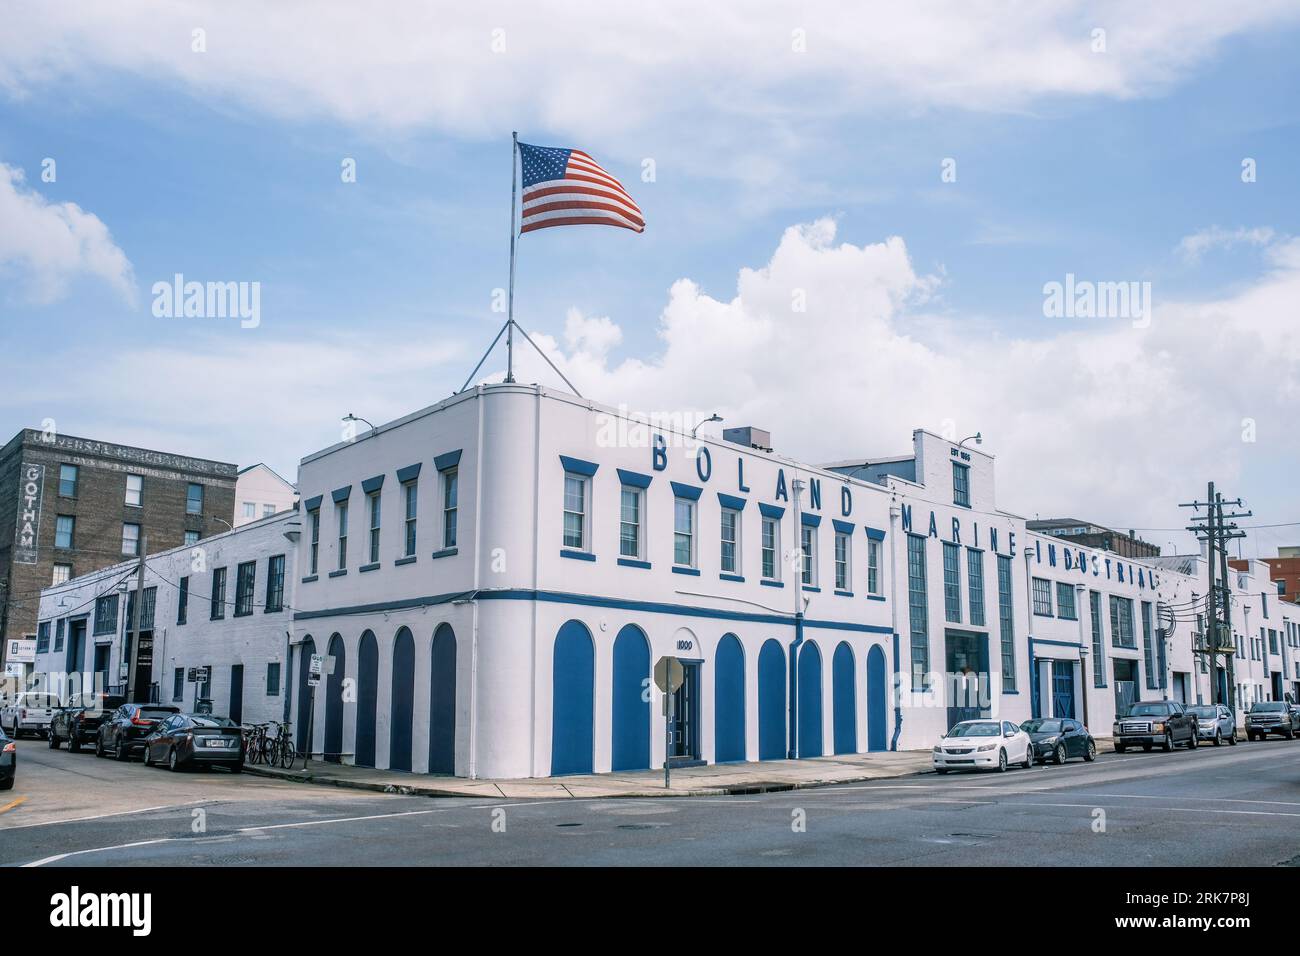 NEW ORLEANS, LA, USA - AUGUST 21, 2023: Boland Marine and Industrial machine shop in the Warehouse District Stock Photo